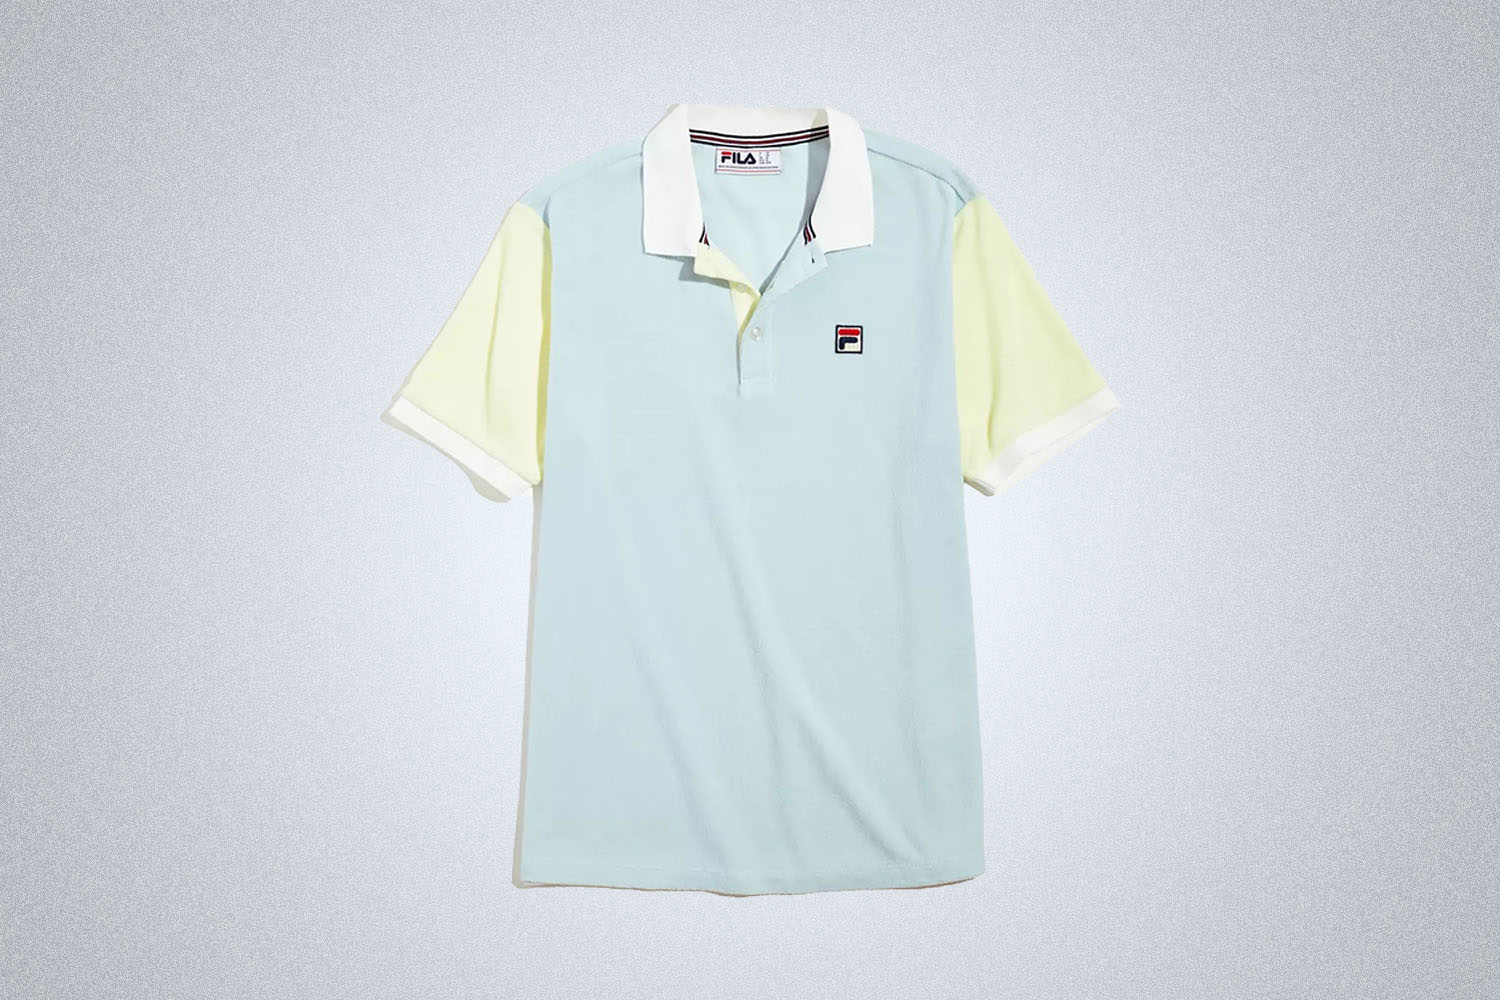 A light blue and yellow color-blocked terry polo from FILA on a grey background